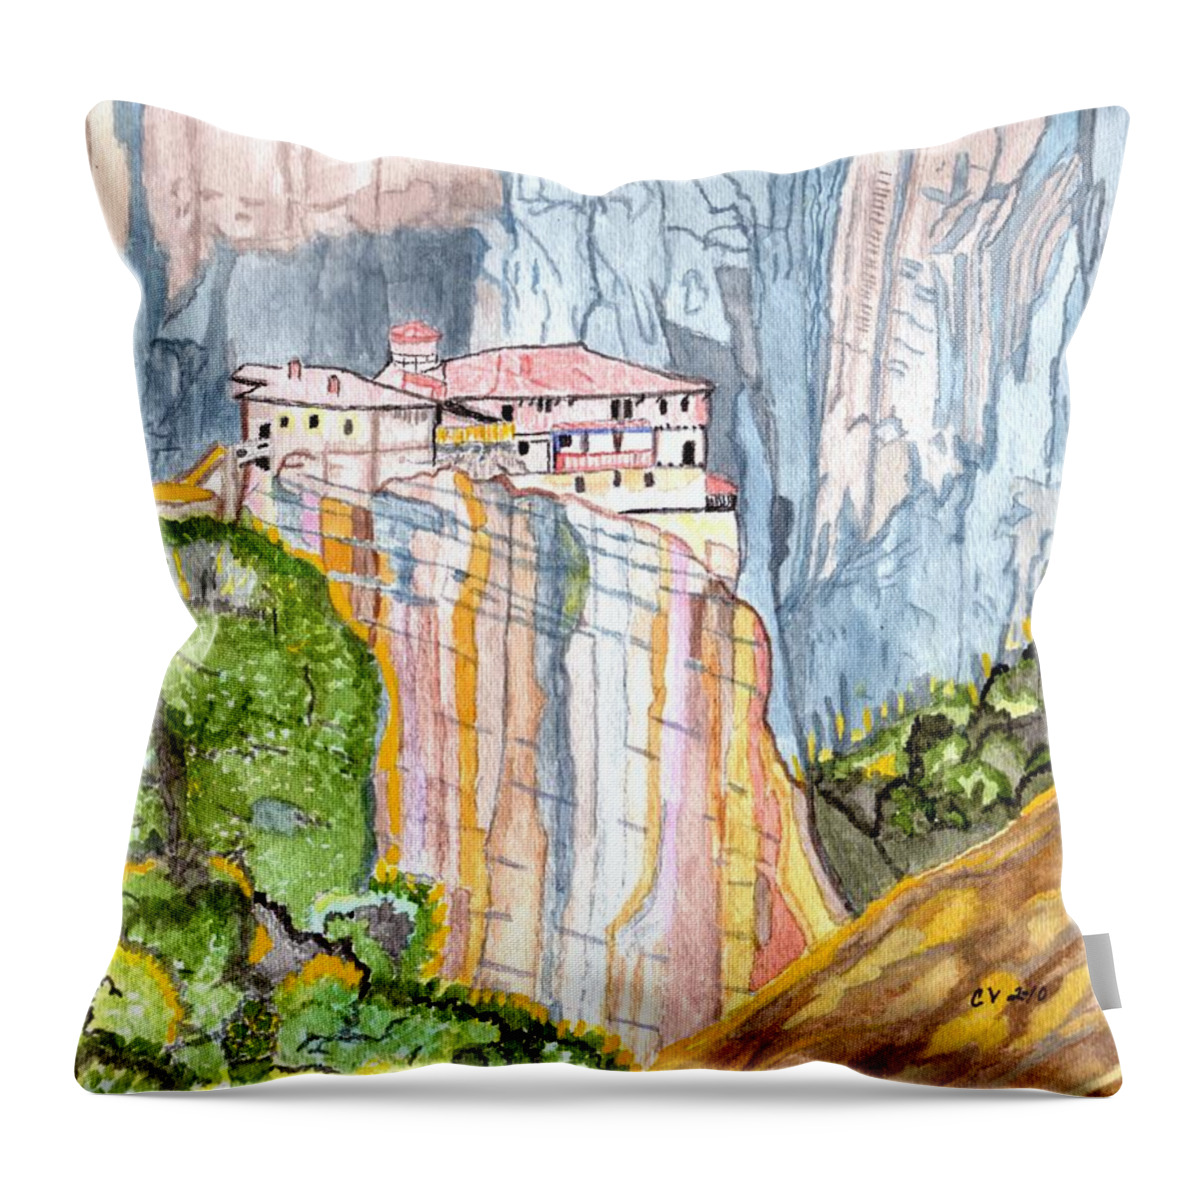 Greese Throw Pillow featuring the painting Hidden Away by Connie Valasco